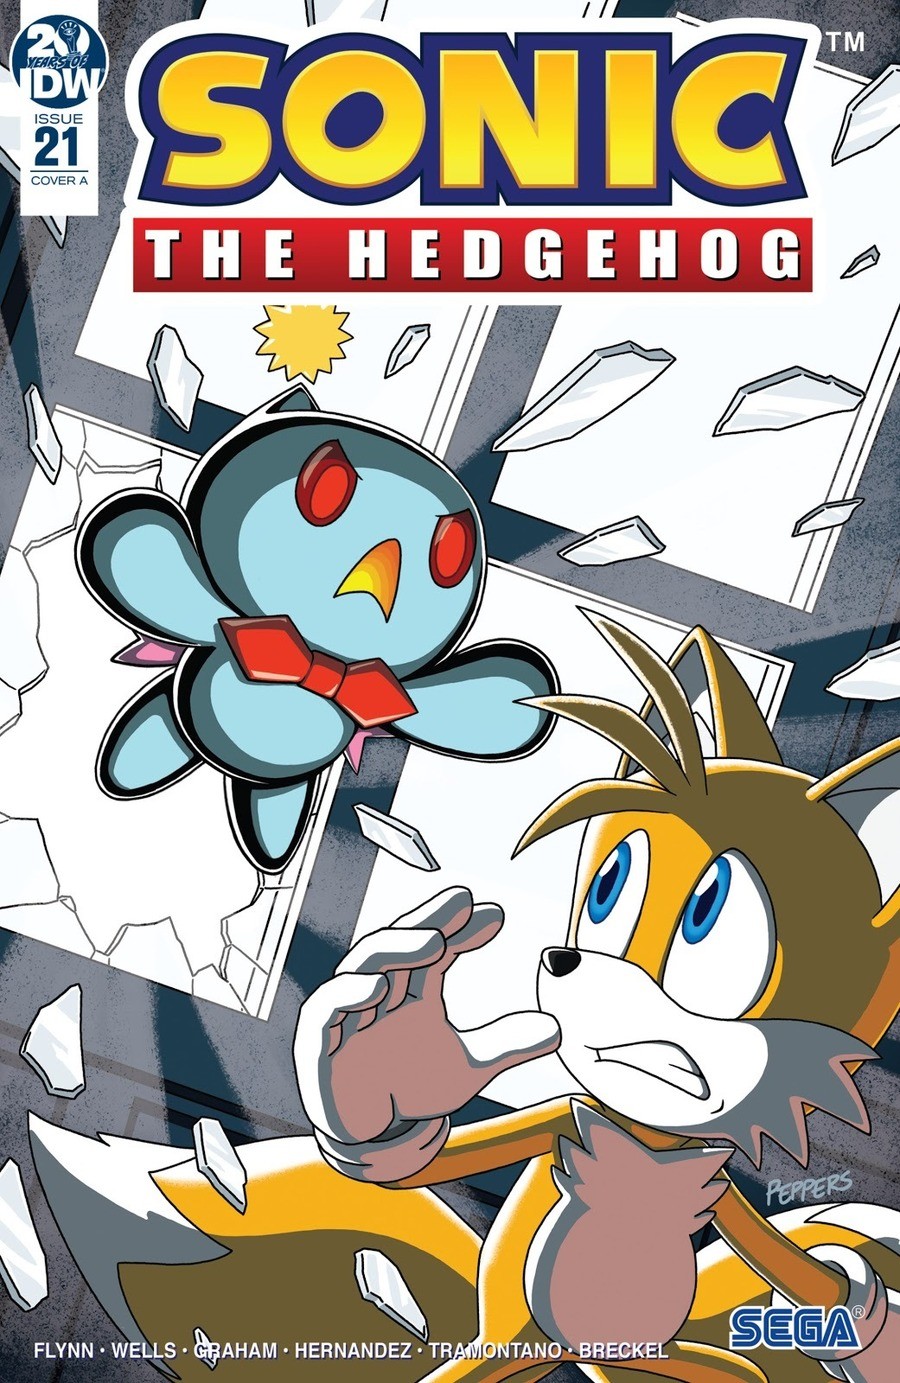 Sonic IDW #21. join list: SonicIDW (93 subs)Mention History I tell ya I'm like the only guy who posts on this channel. Hell yeah, the best girls are back in the saddle. Bittersweet to see the Cyclone show up and kick some ass for the first time in what feels like forever, only t